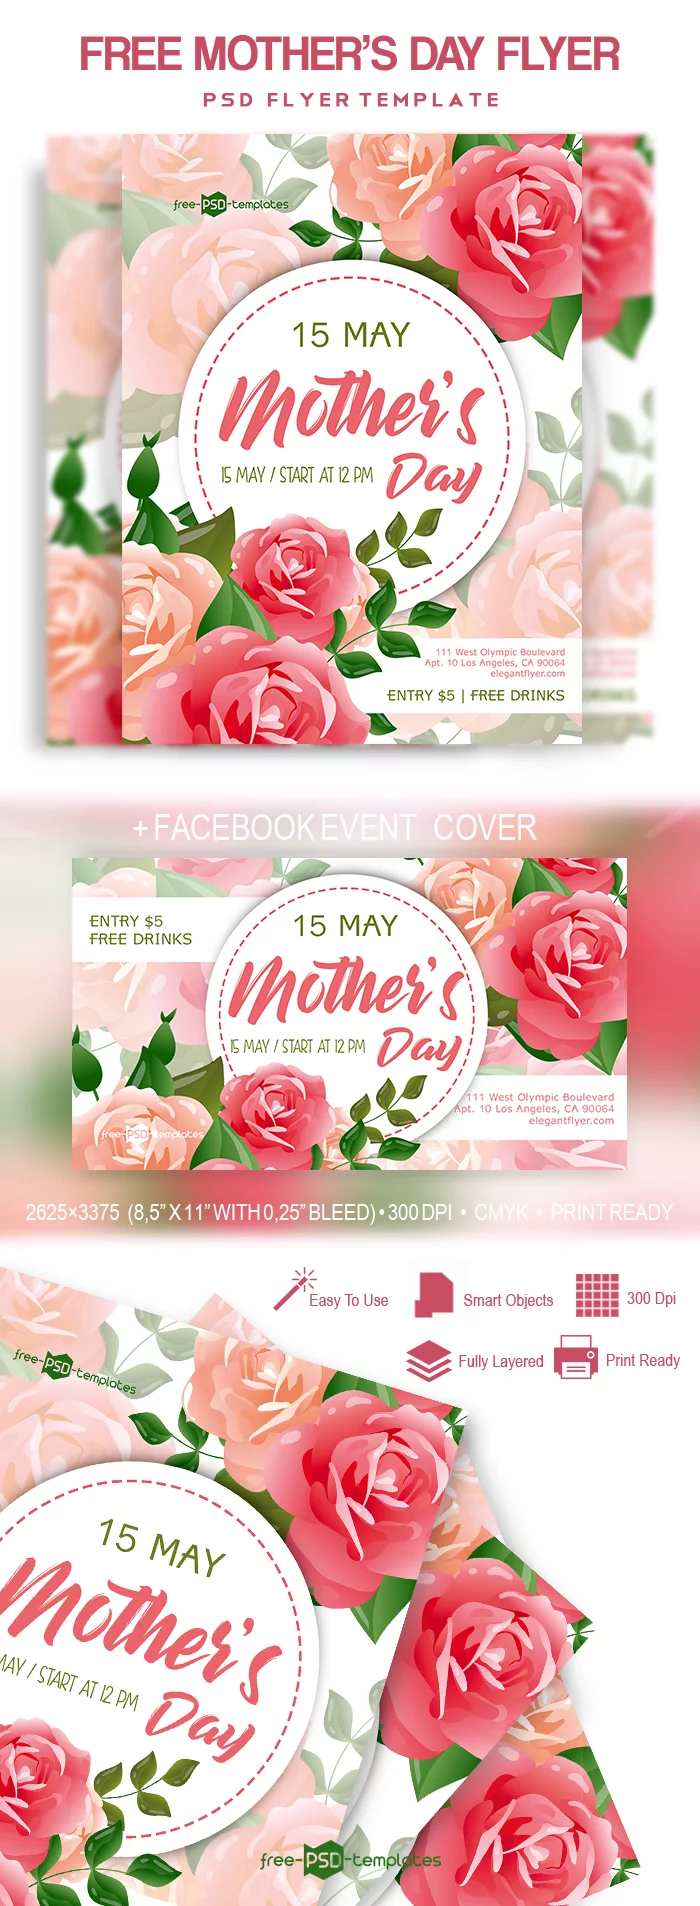 Free Mother’s Day Flyer in PSD